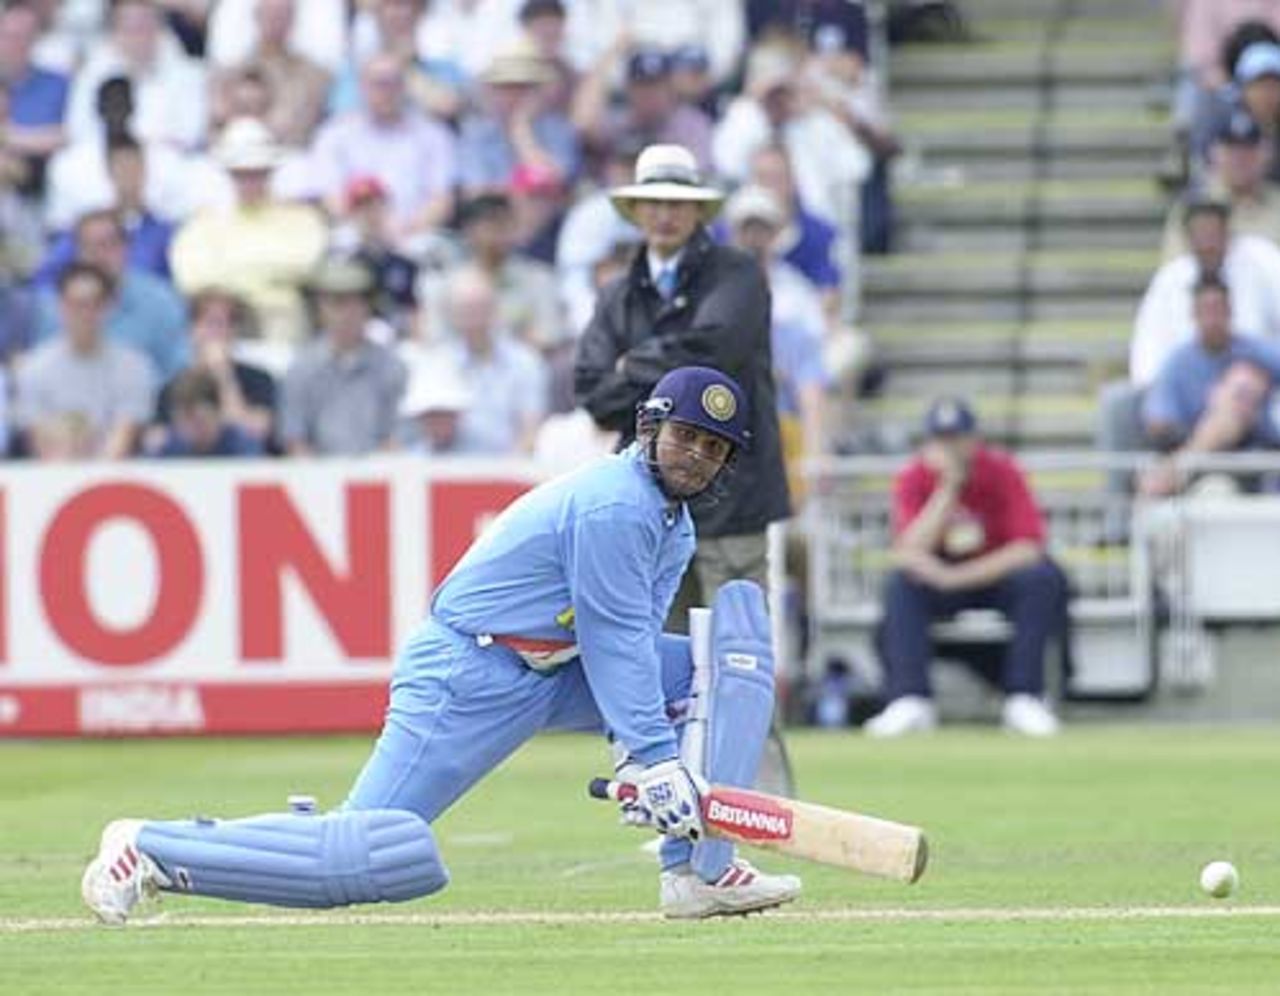 Virender Sehwag with a reverse sweep in the Indian innings, England v India, NatWest Series, Lord's, Sat 29 Jun